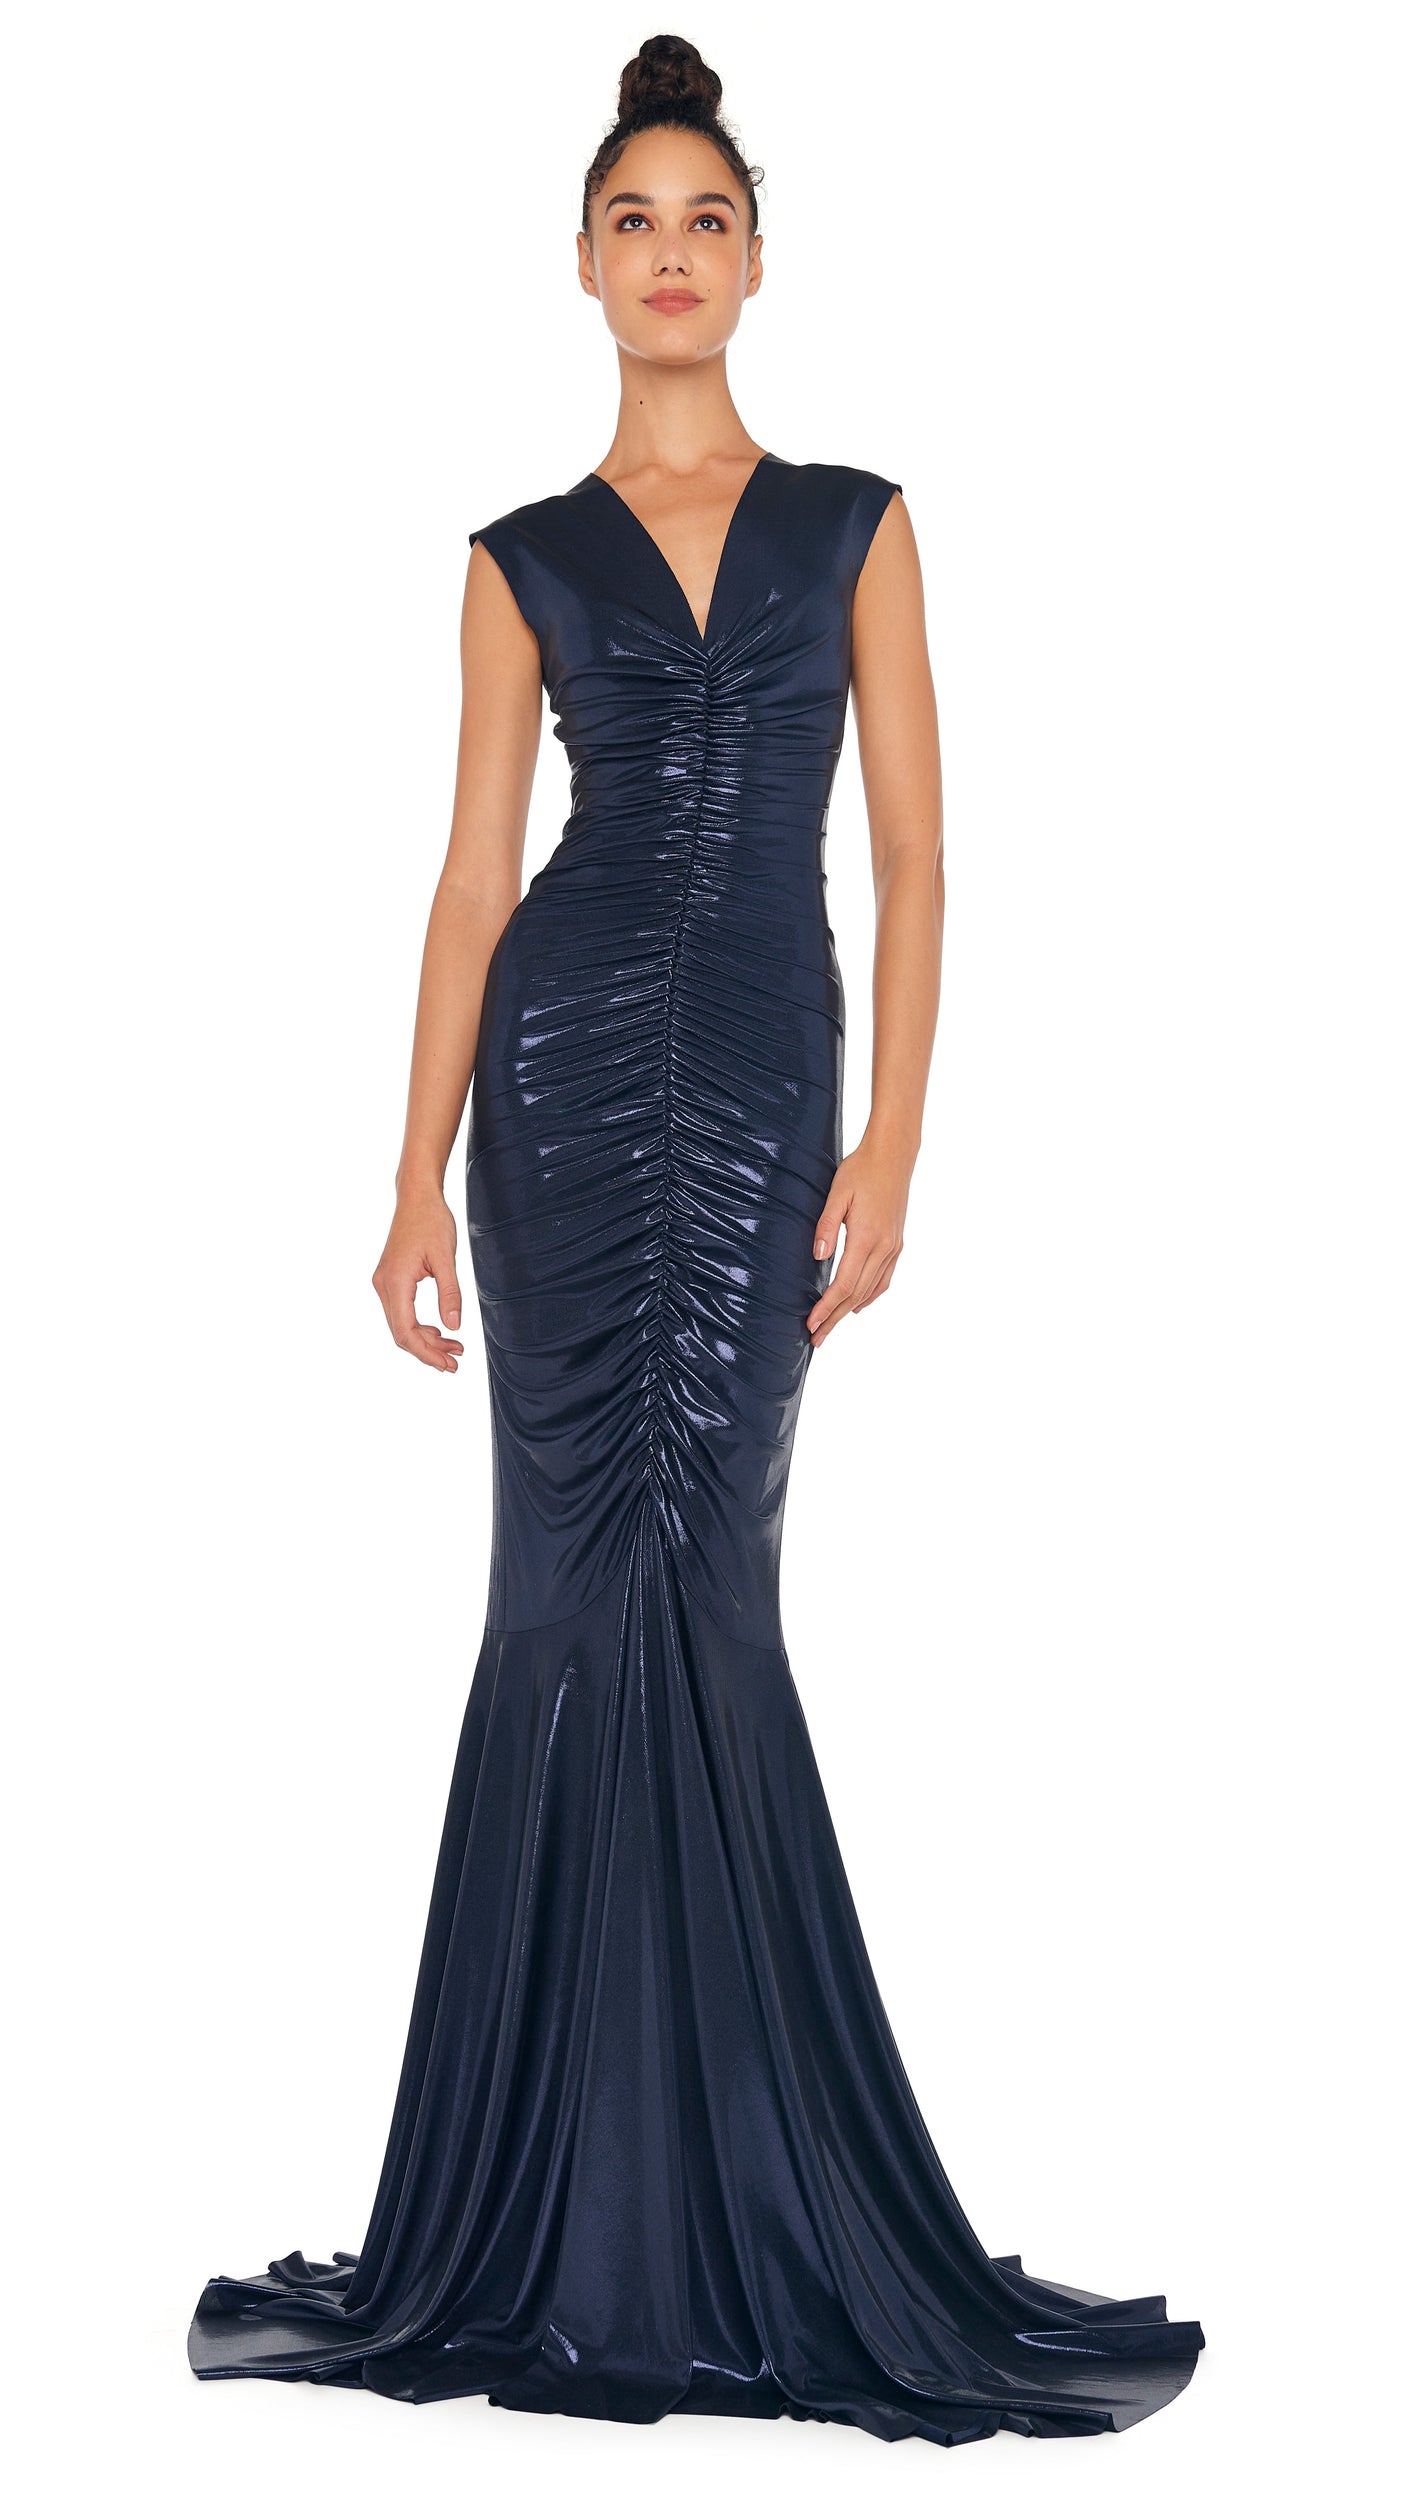 Sleeveless Deep V Neck Shirred Front Fishtail Gown